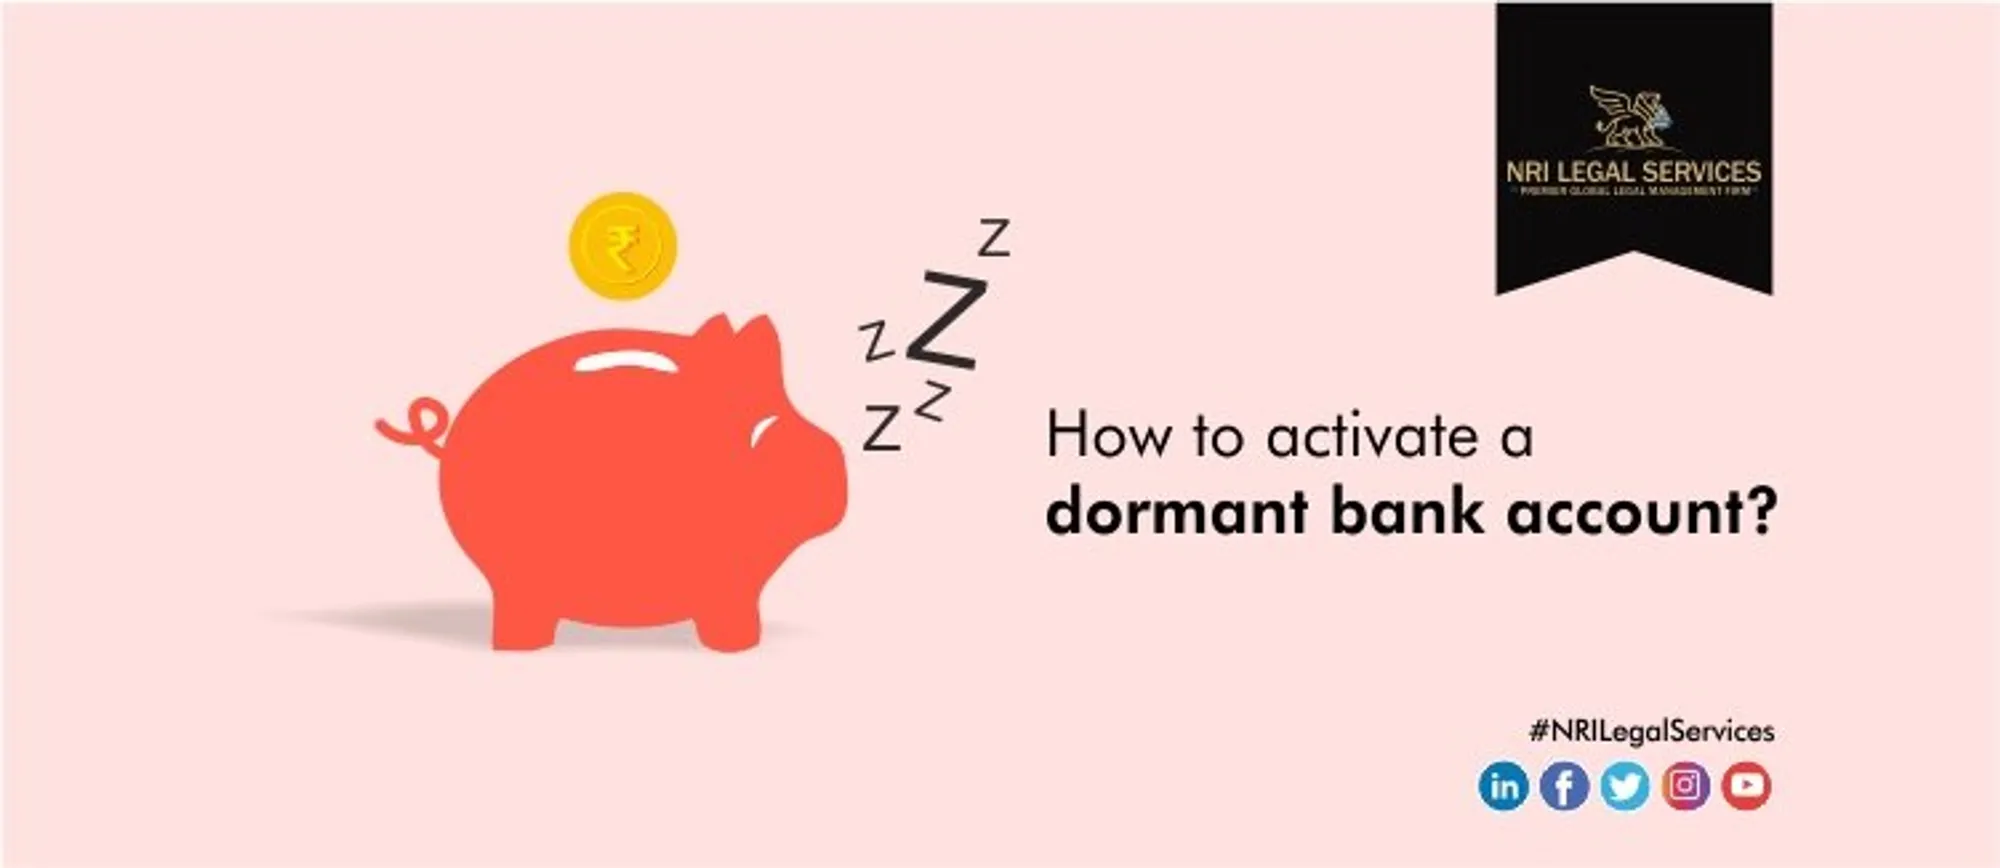 How to activate a dormant bank account